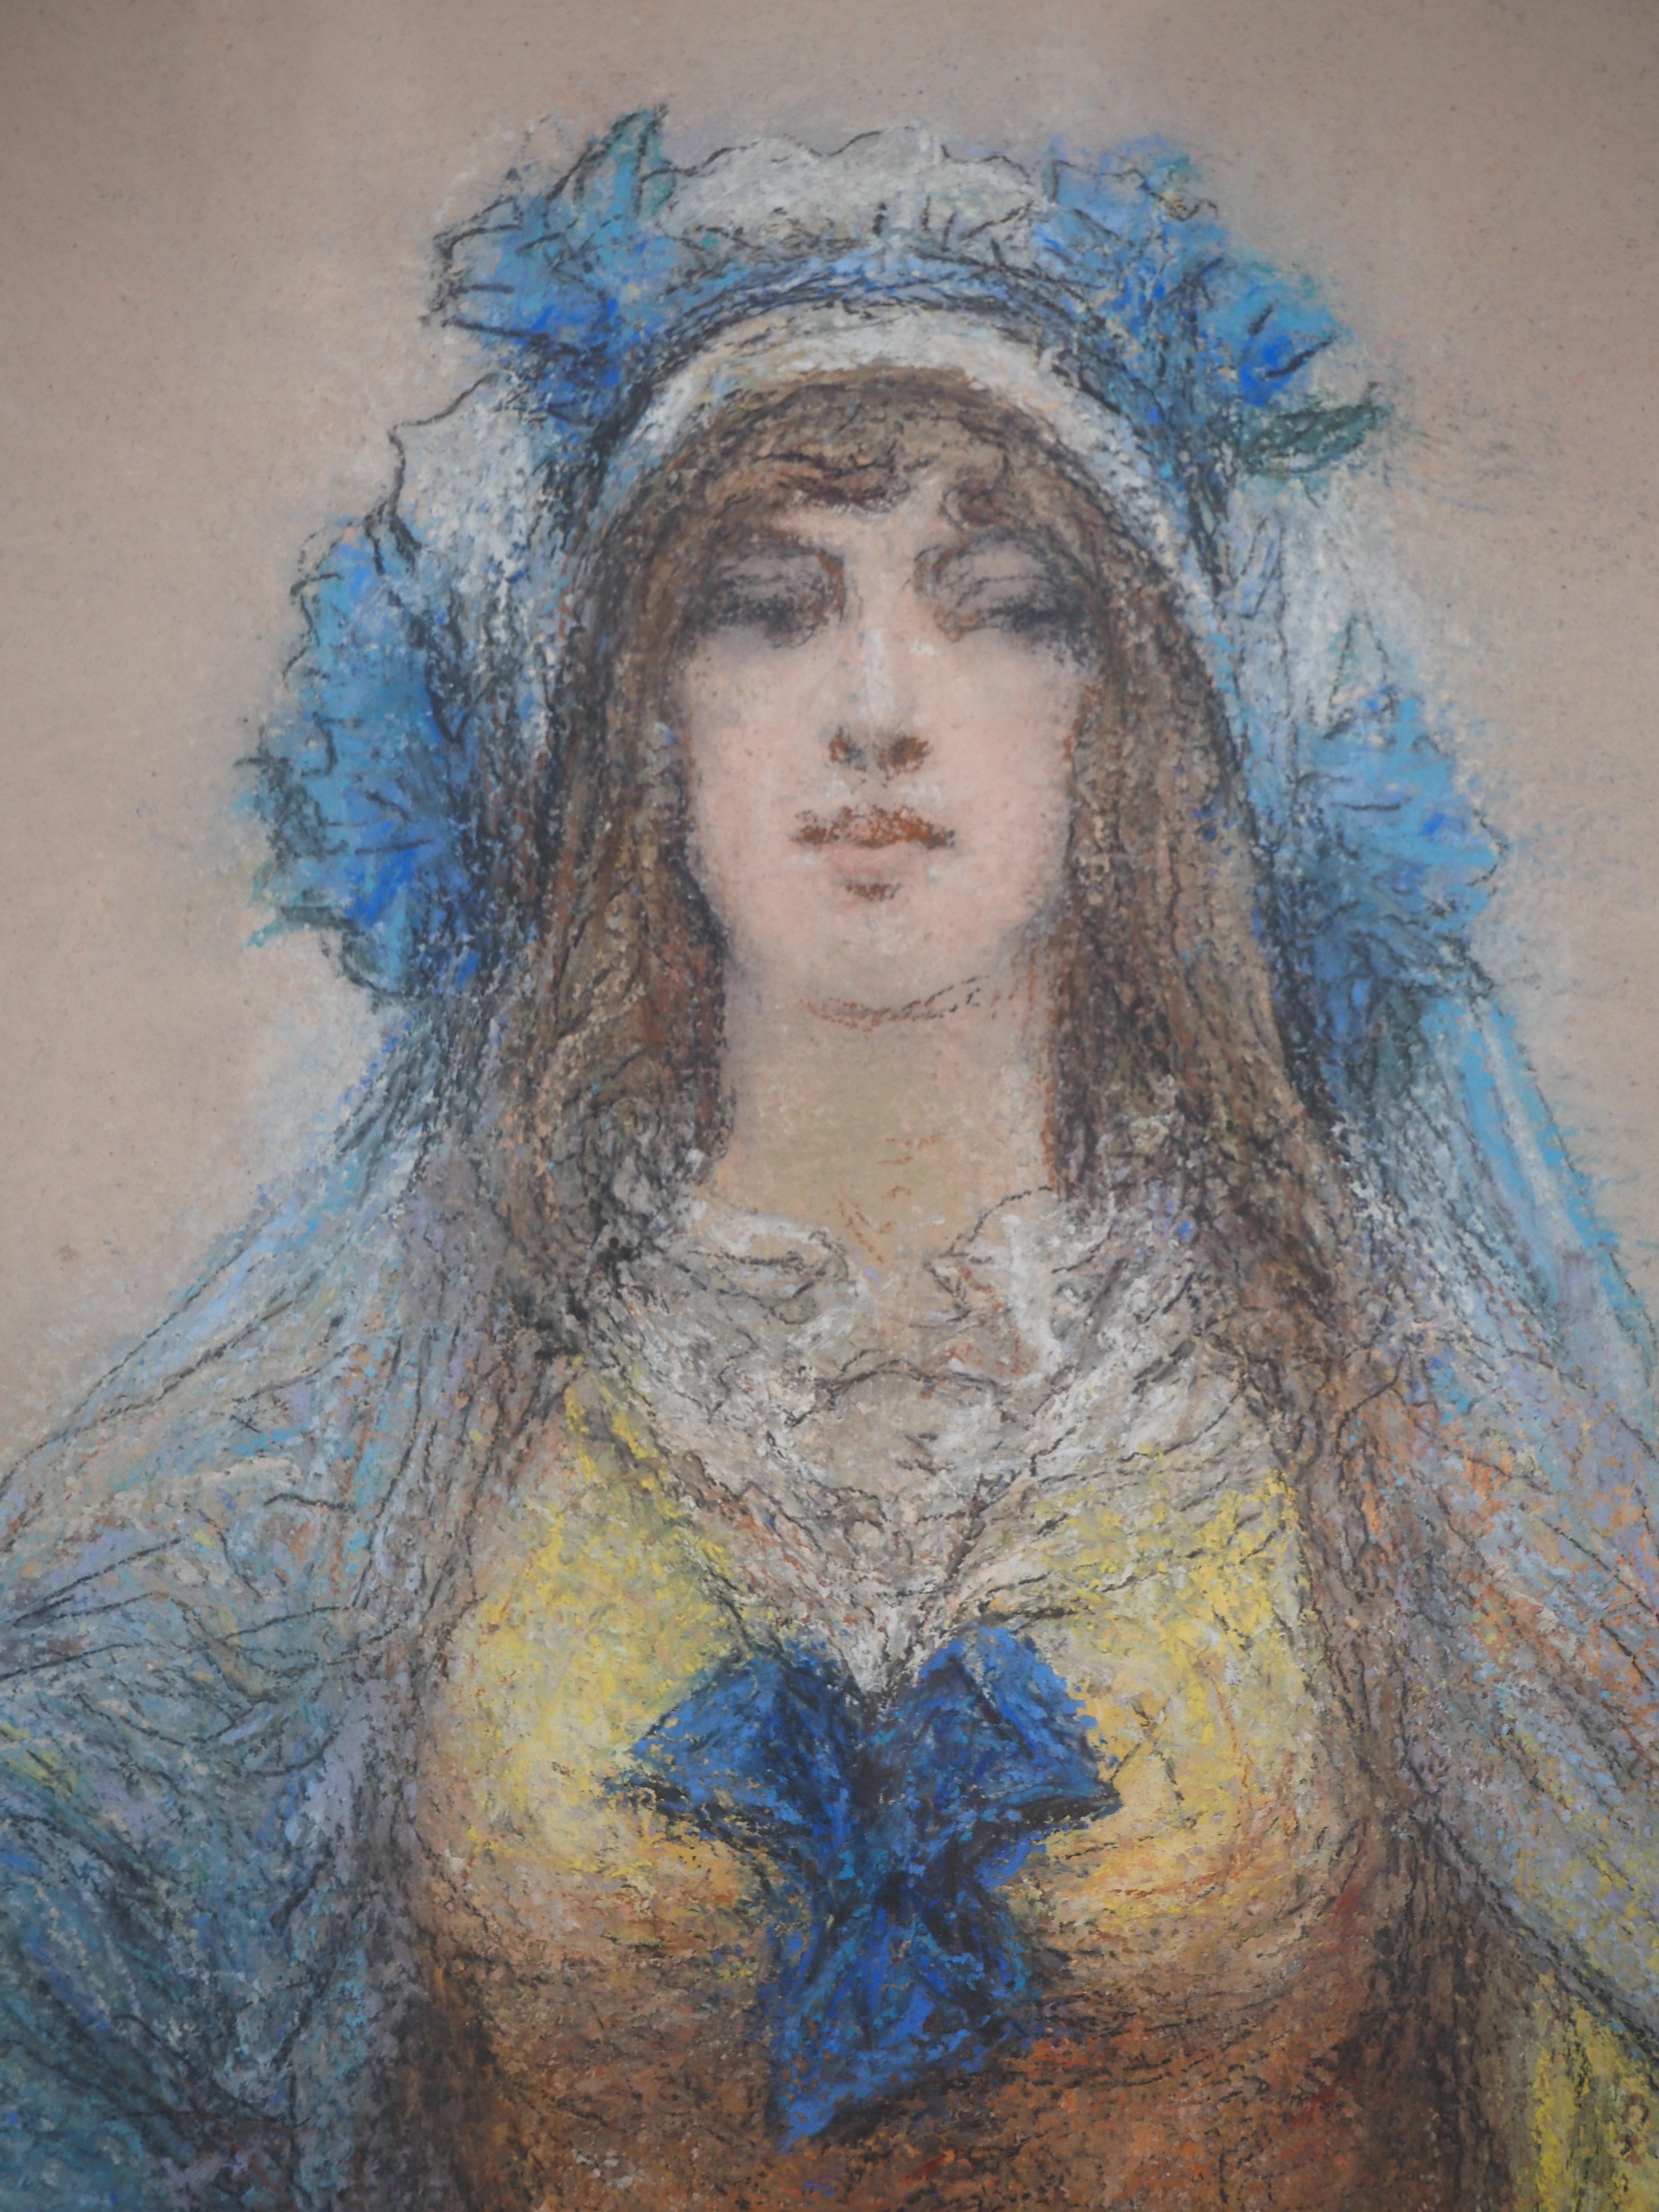 Georges Clairin
Sarah Bernhardt in Yellow and Blue

Original charcoal drawing with tempera
Signed bottom right
On paper 42 x 26 cm at view (c. 17 x 10 in)
Presented in a golden wood frame 55 x 39 cm (c. 22 x 16 in)

INFORMATION : Georges Clairin